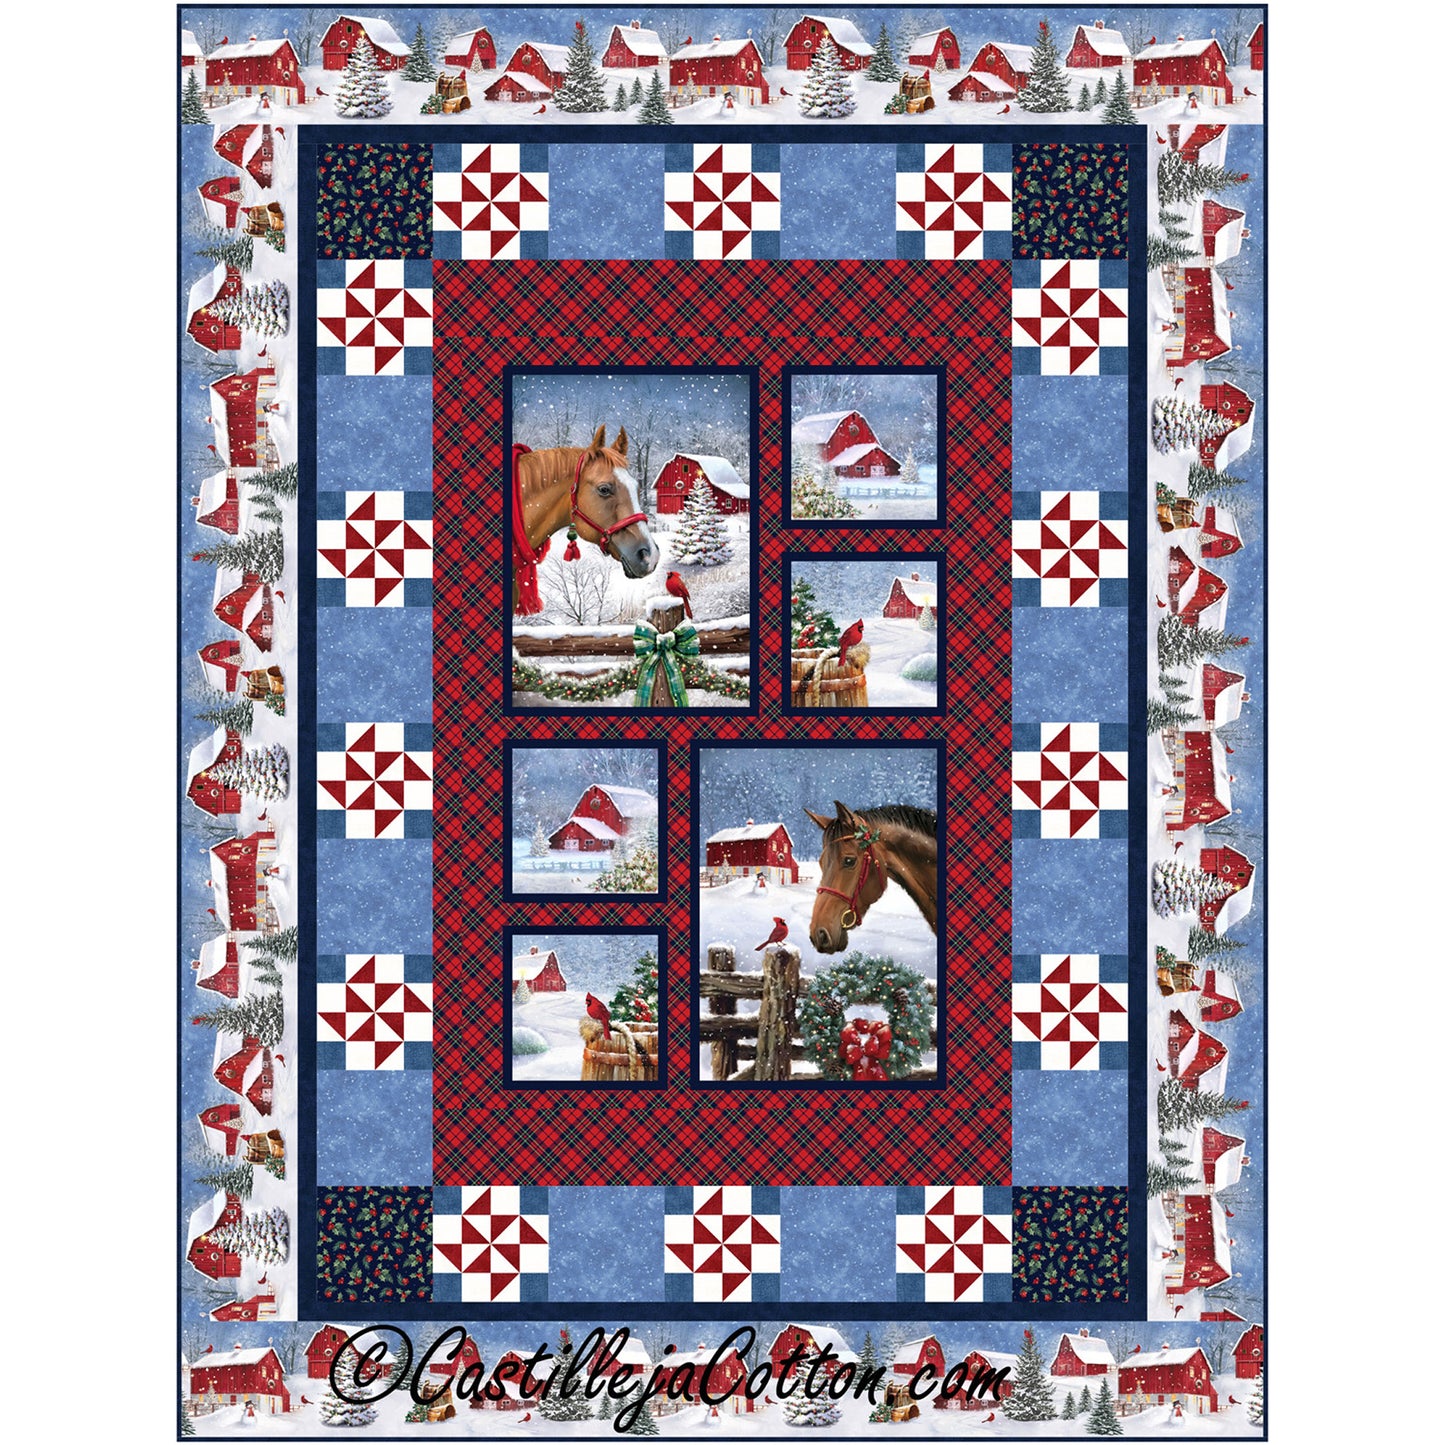 Festive quilt adorned with horses, snow, barns, wreaths and evergreen trees coated in snow with border of  peppermint candy, ideal for winter.